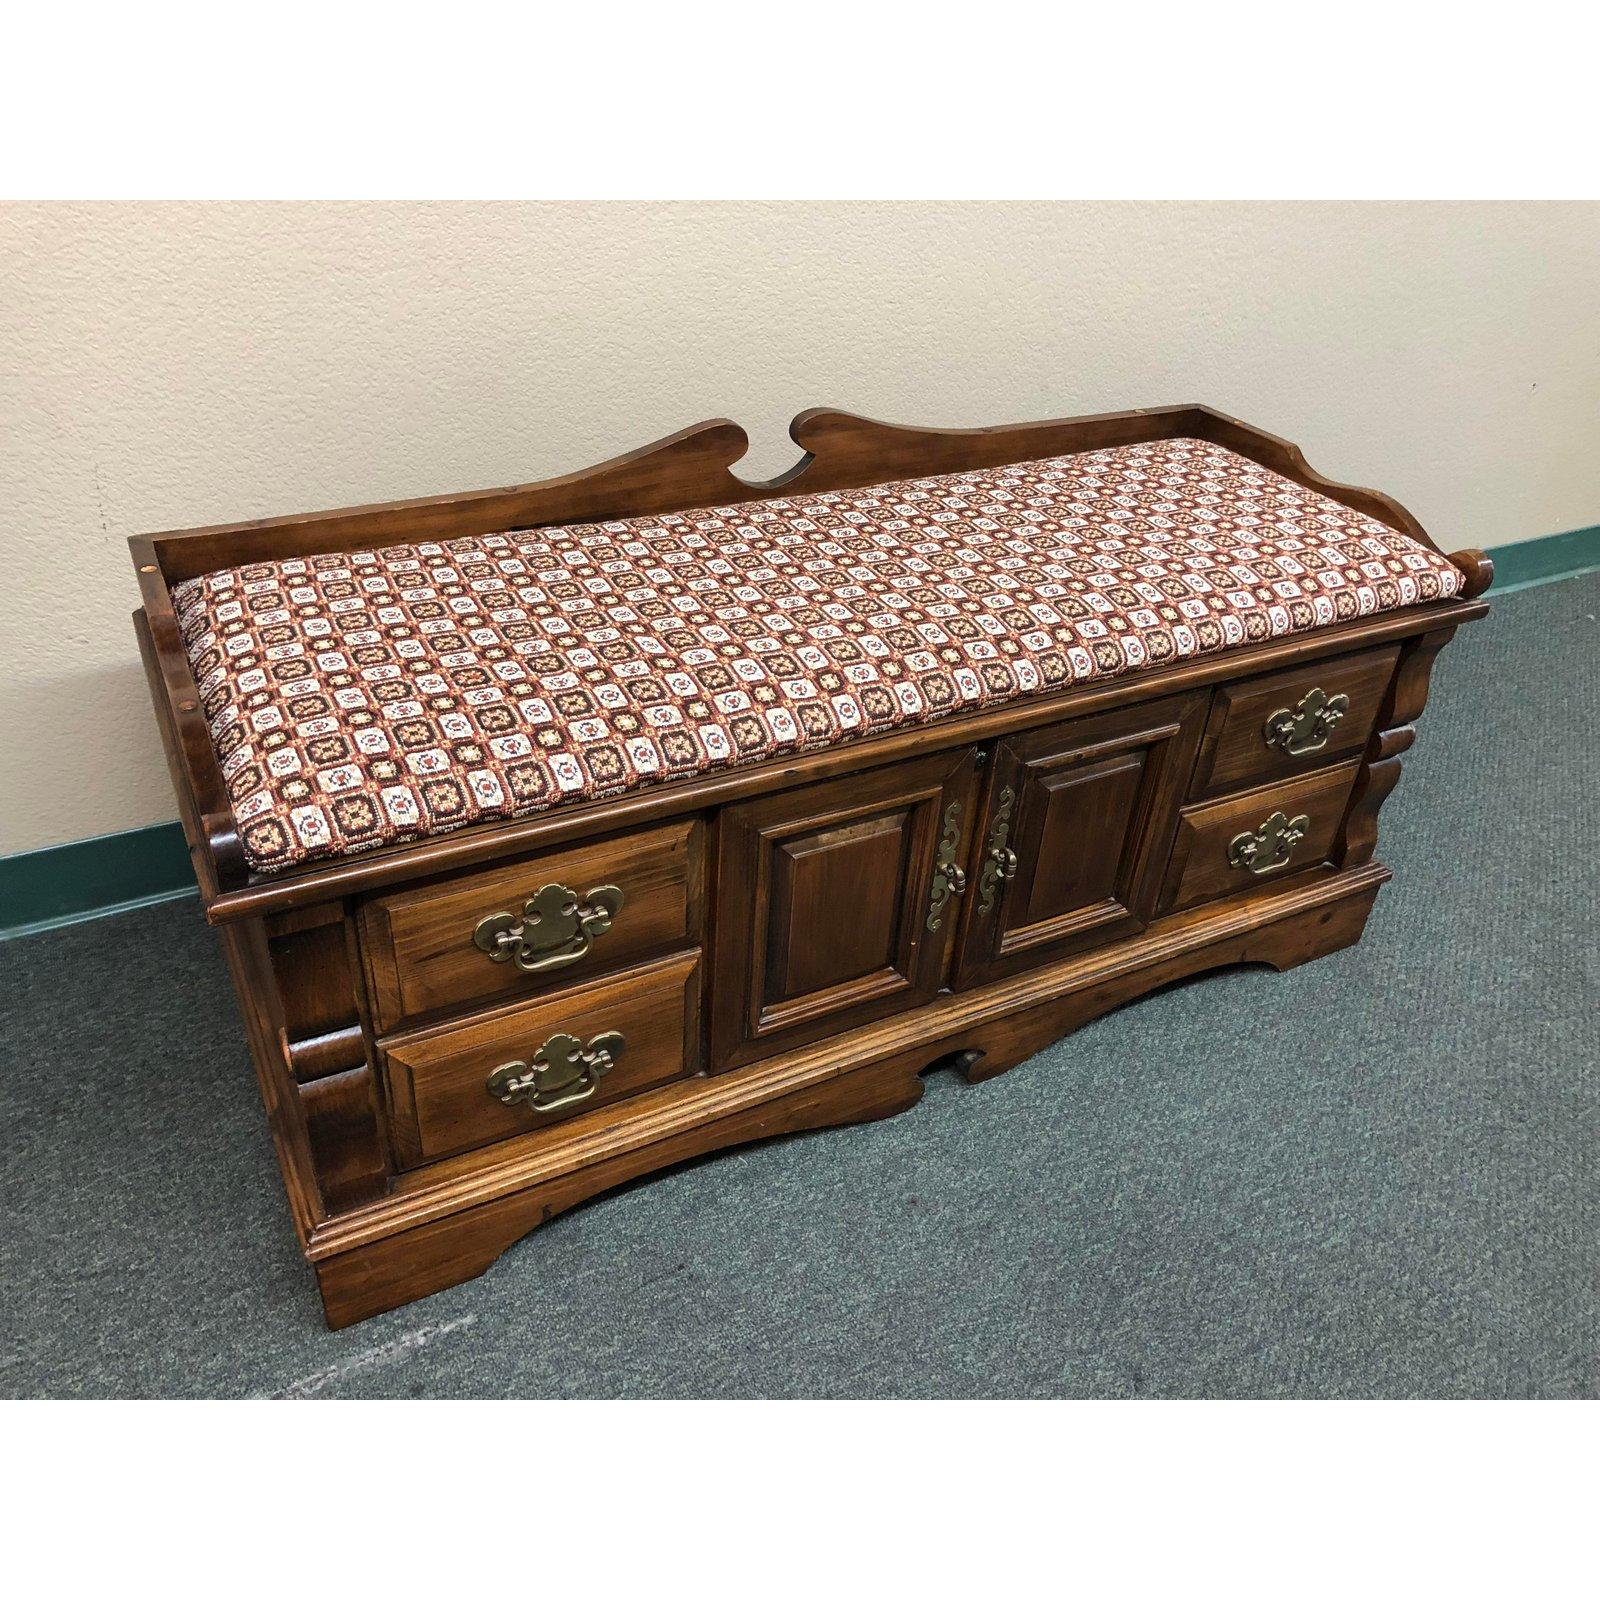 This is a vintage Lane Furniture hope chest perfect for blanket storage, toys, books etc. Cushion onto still firm and good condition. Has a push in lock to open the inside, no keys to lock. Made out of cedar, wood looks really good from over the